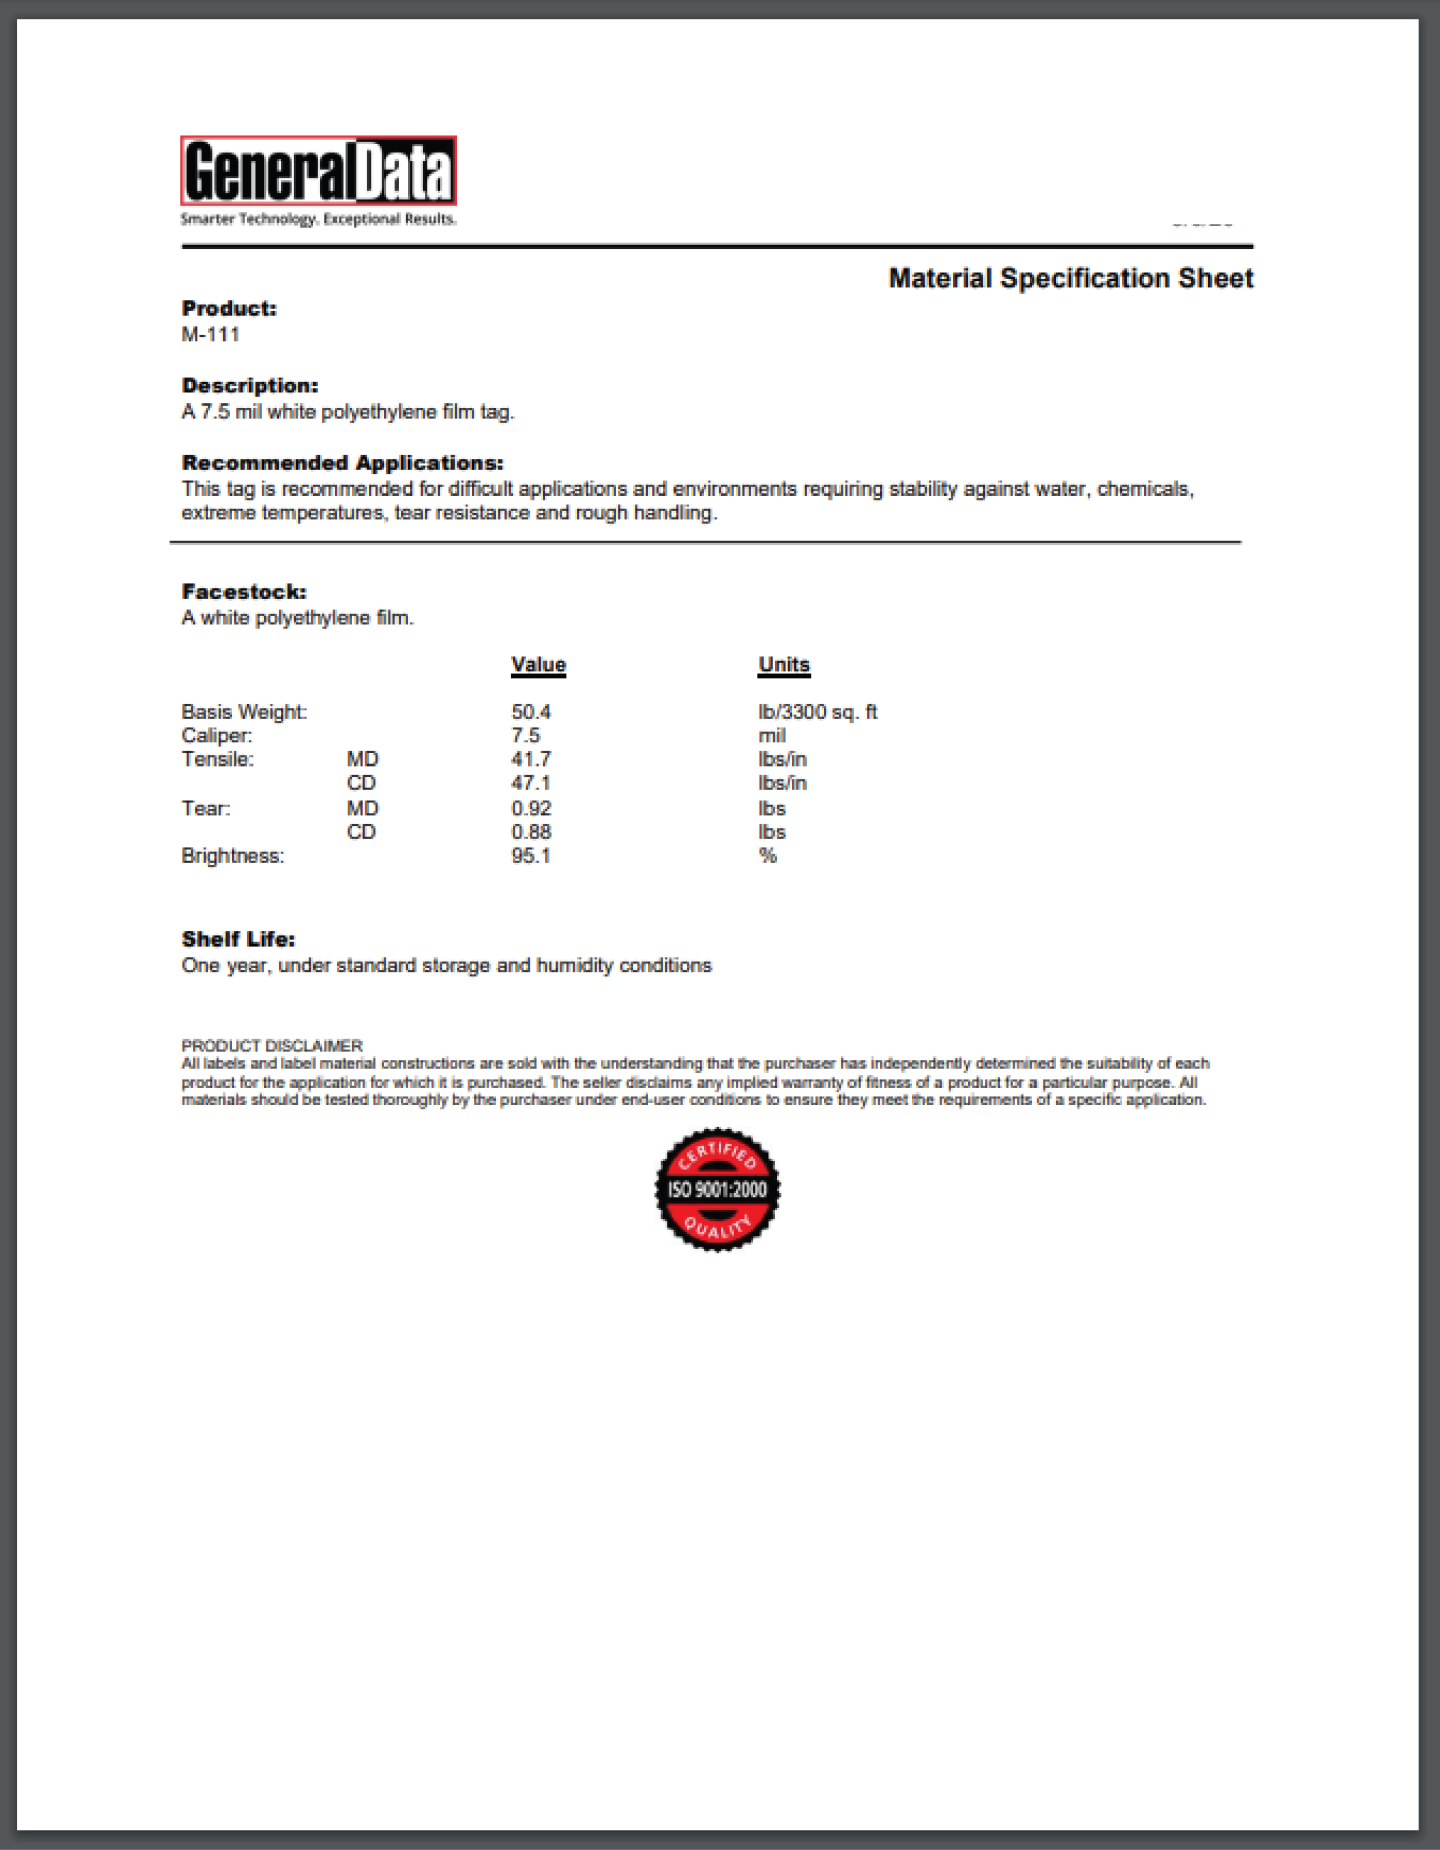 M-111 Material Specification Sheet